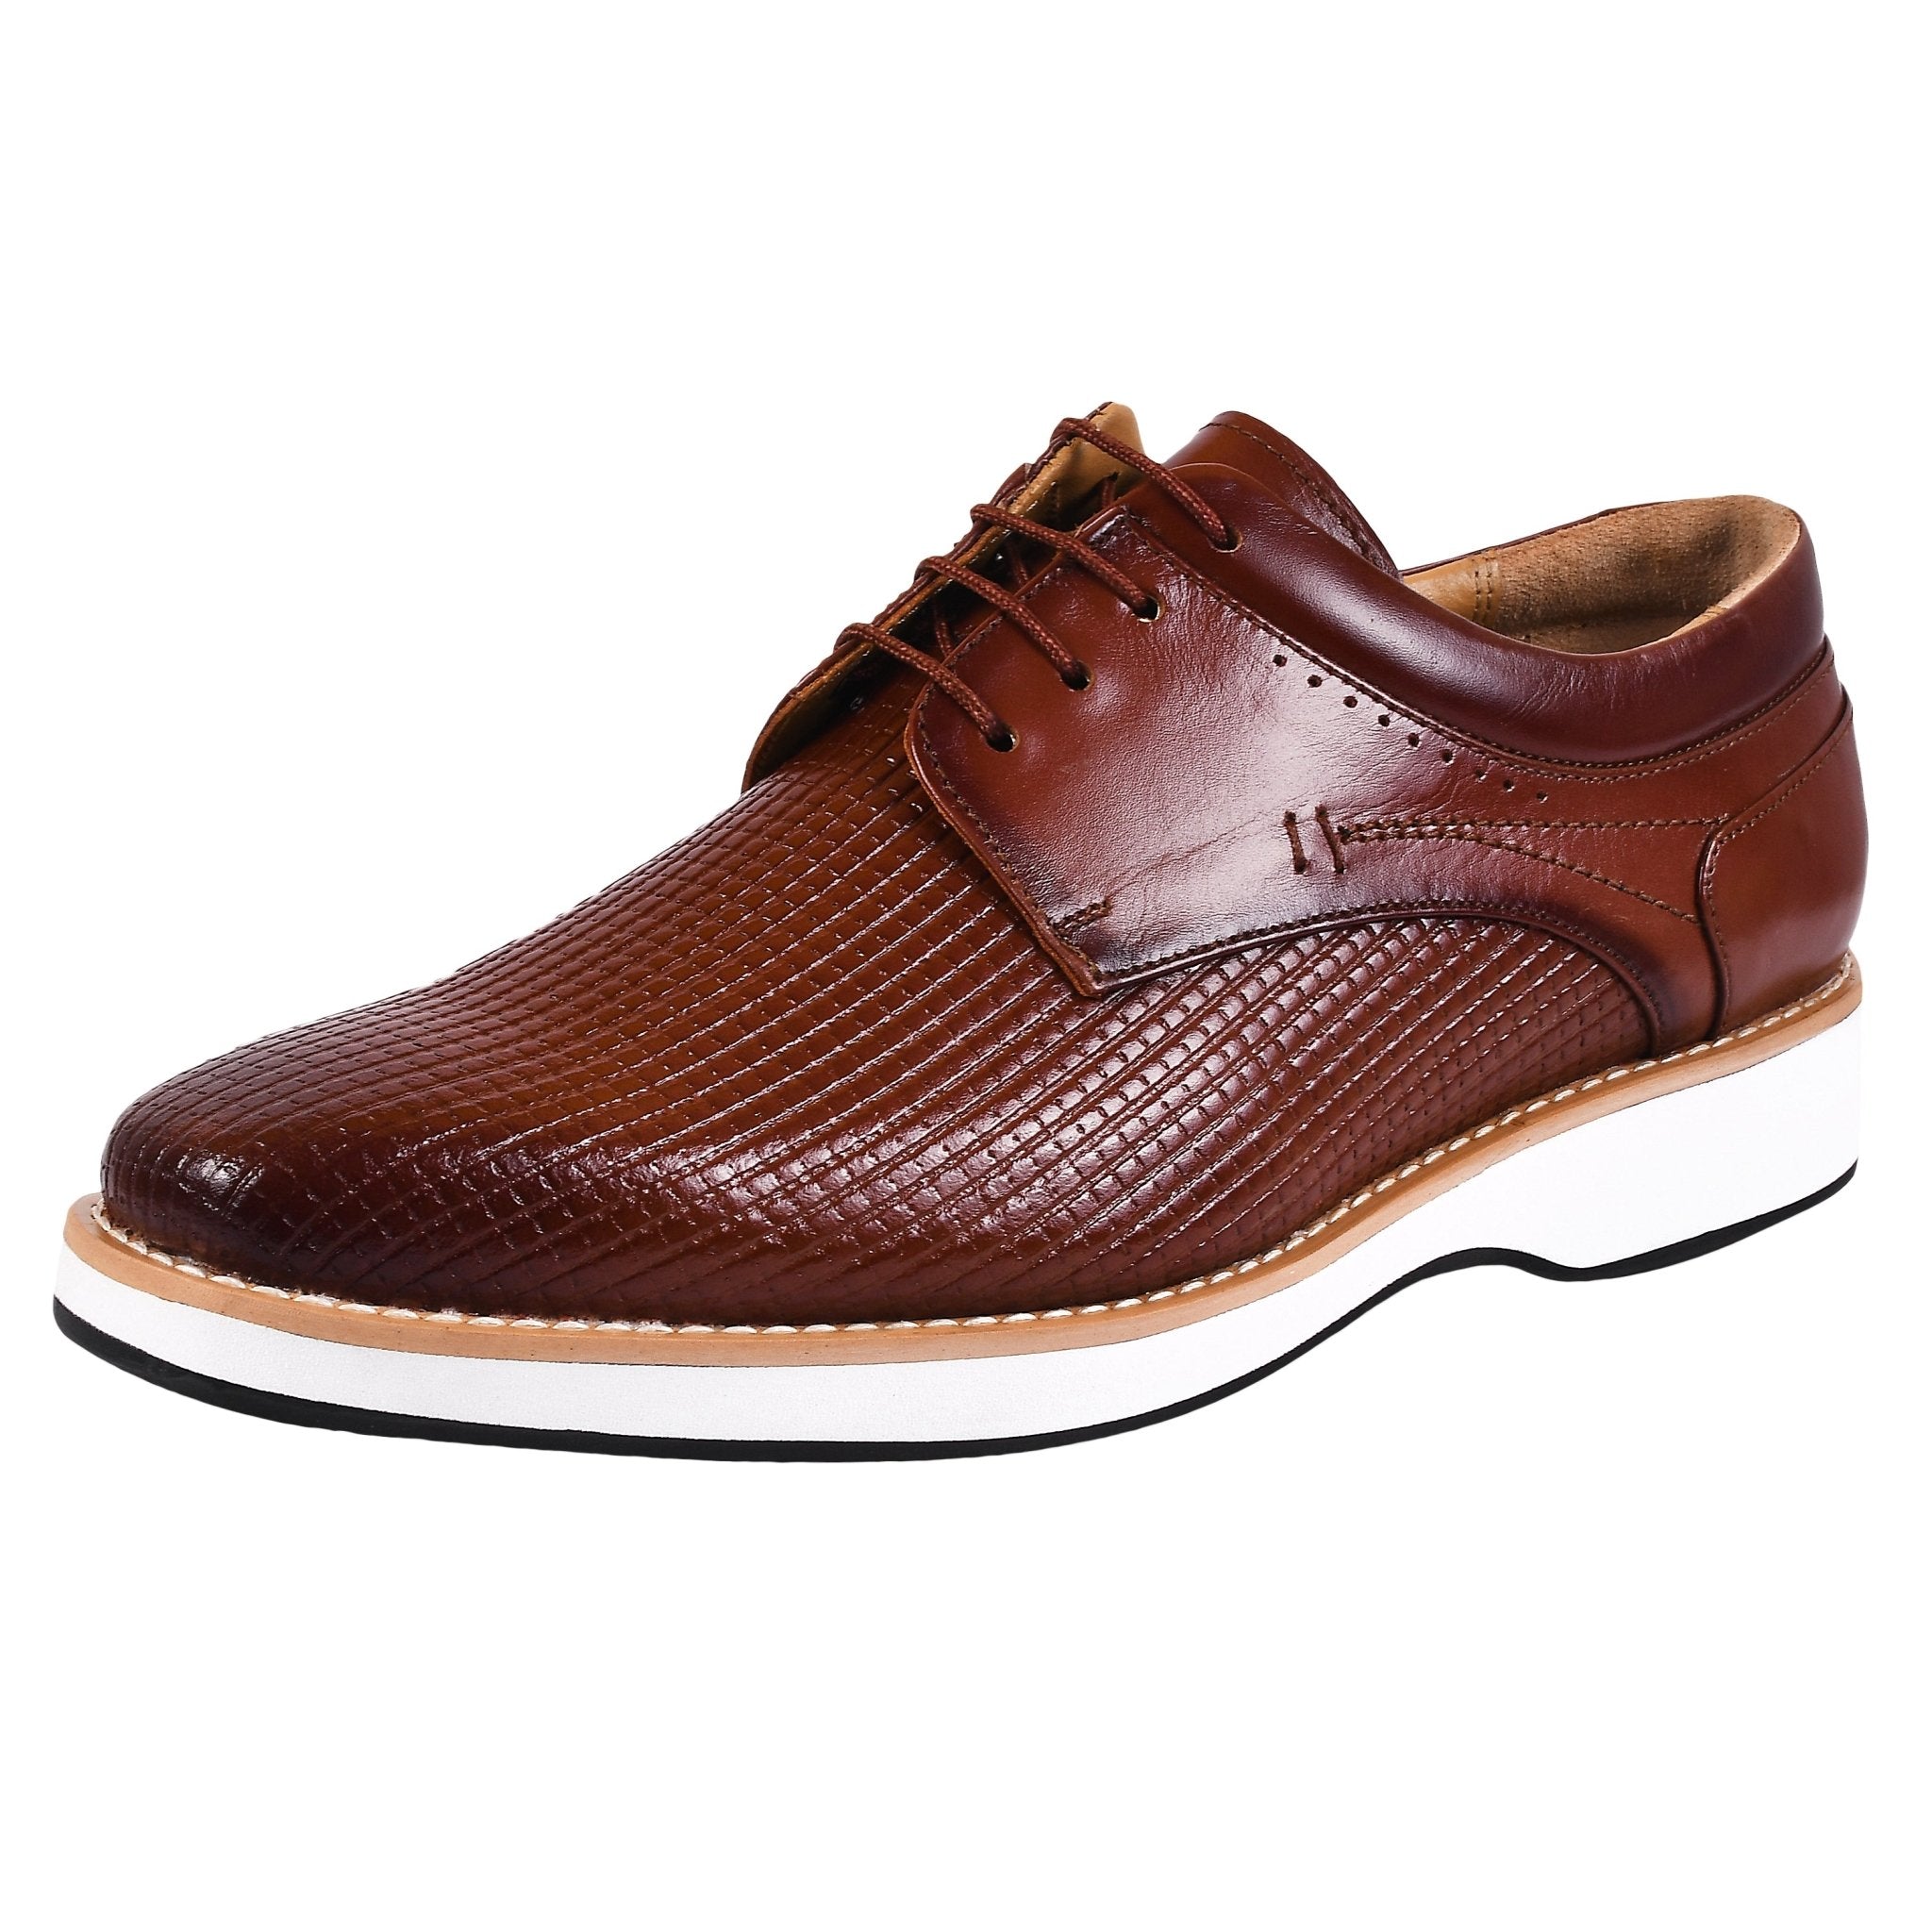 GARY Eva Genuine Leather Oxford Casual Shoes for Men